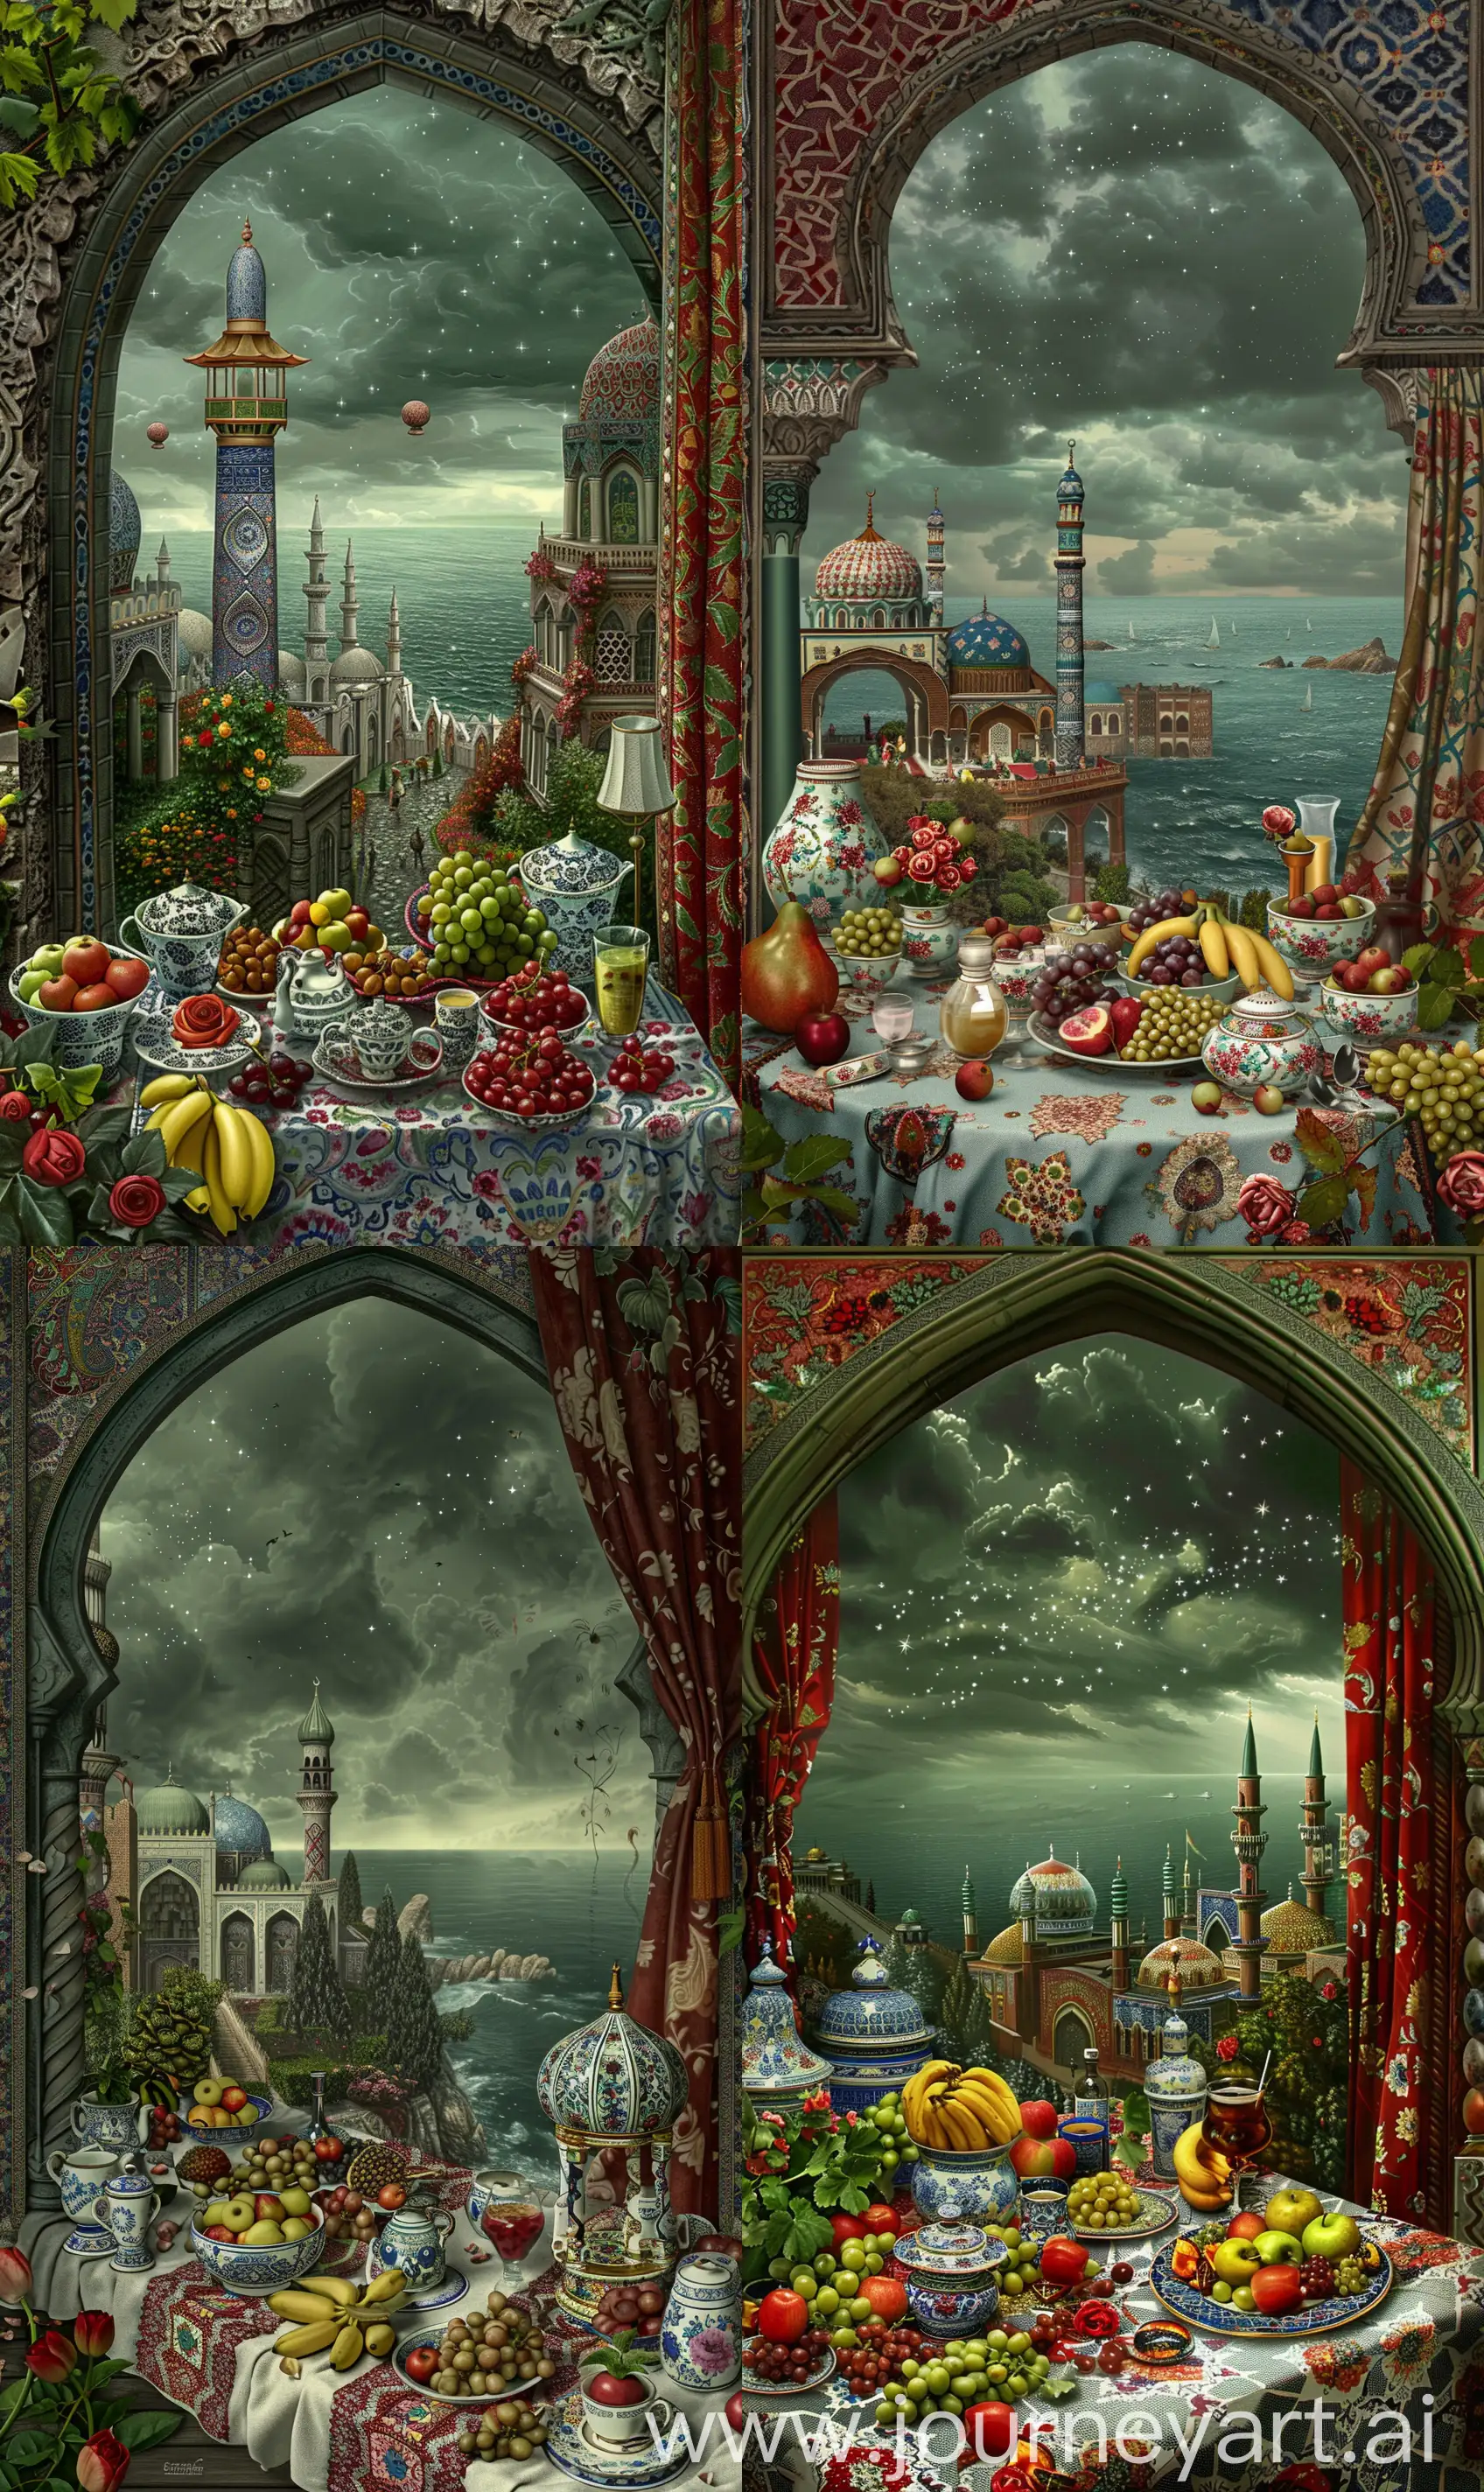 Fantasy art in style of Renaissance painting, view from a Timurid arch, view of floral arabesque tiled islamic buildings and mosques having red white blue tiled exterior covered with persian tiles, beyond a vast grey sea, a table cloth full of islamic ornamented porcelain utensils with many fruits grapes bananas apples, rose tulip flowers and drinks, islamic ornamented lamp on table, arabian curtain on side, dark greenish grey cloudy sky with stars --ar 3:5 --v 6